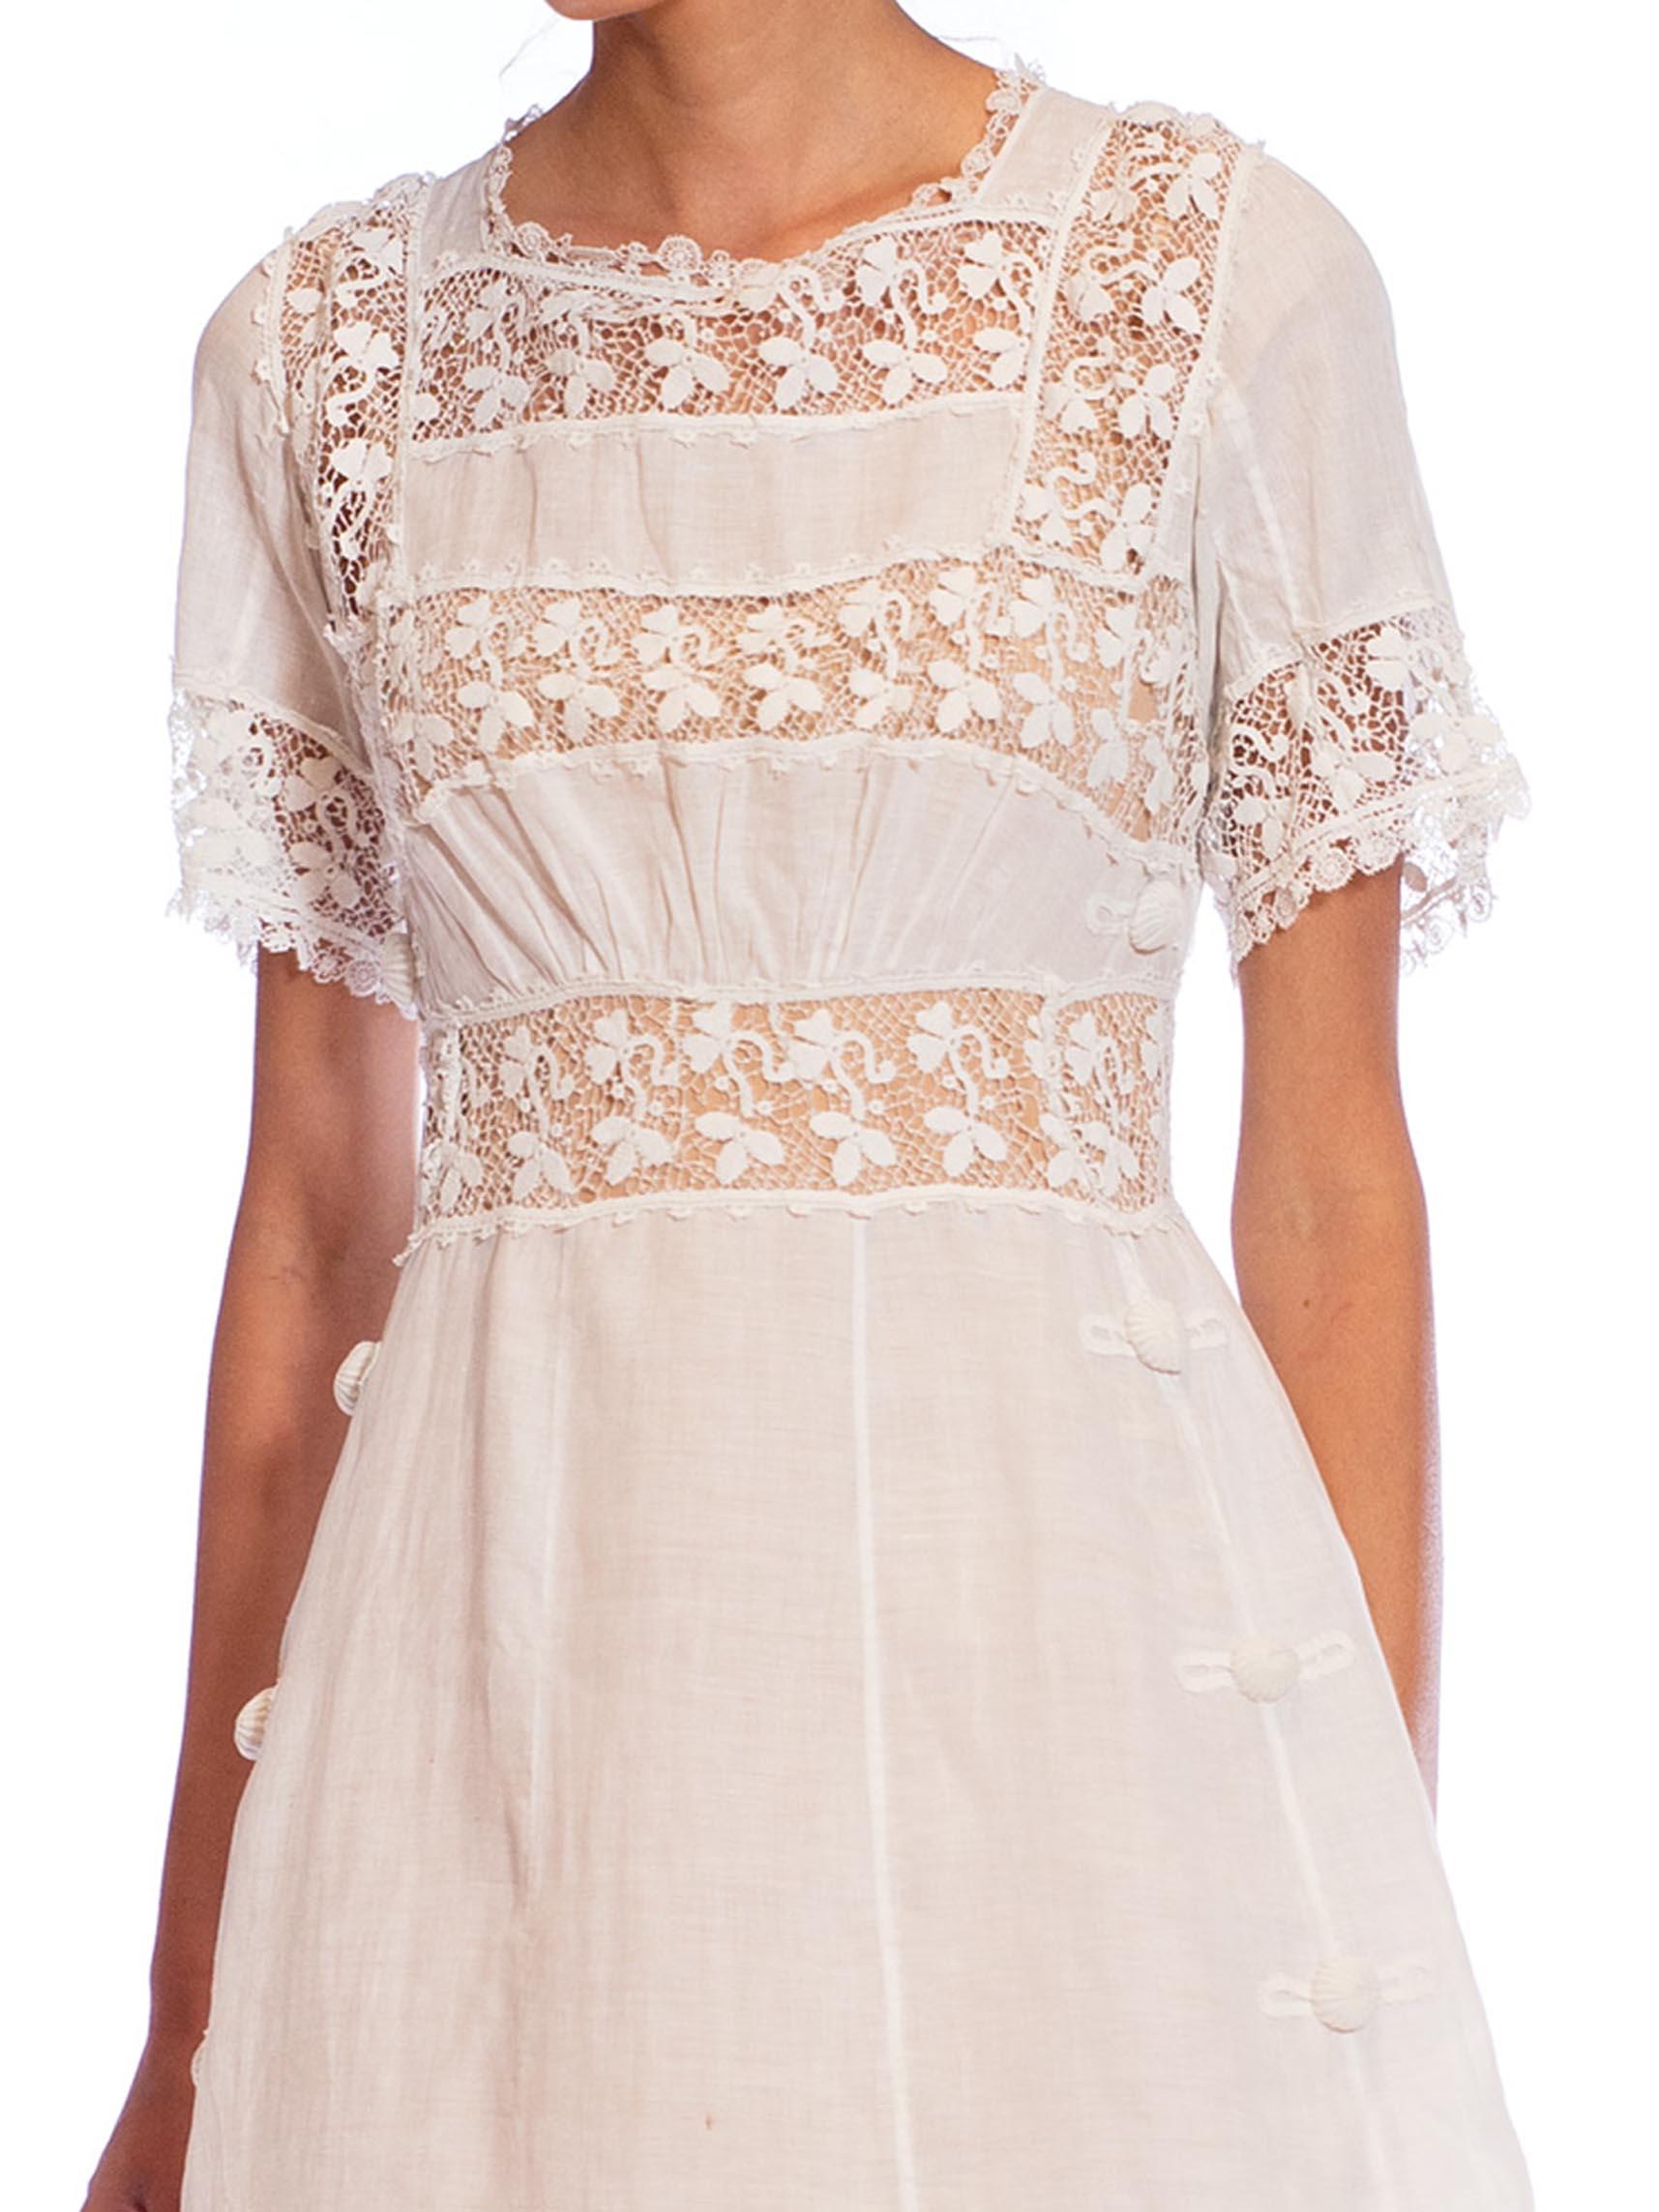 Edwardian White Linen & Lace Tea Dress With Sleeves For Sale 6